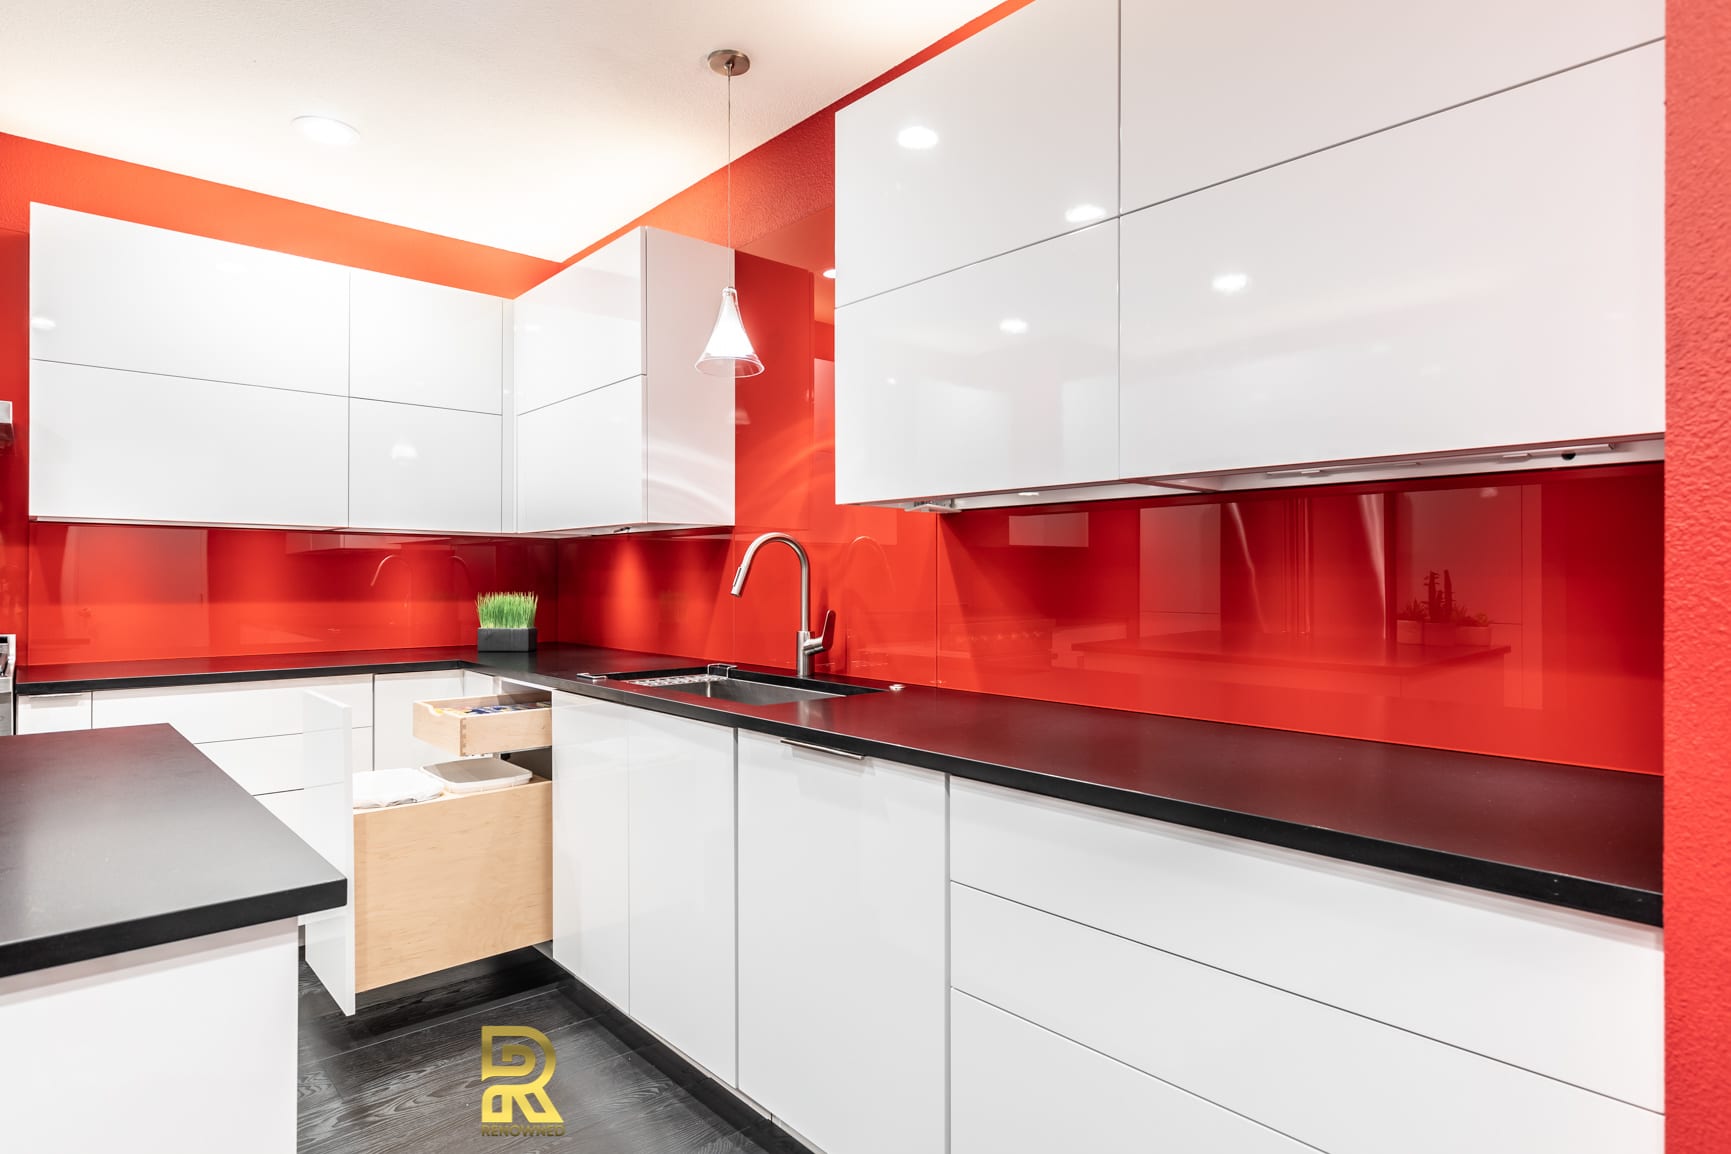 Red Hot Dallas High Rise Condo Kitchen After Remodeling by Renowned Renovation